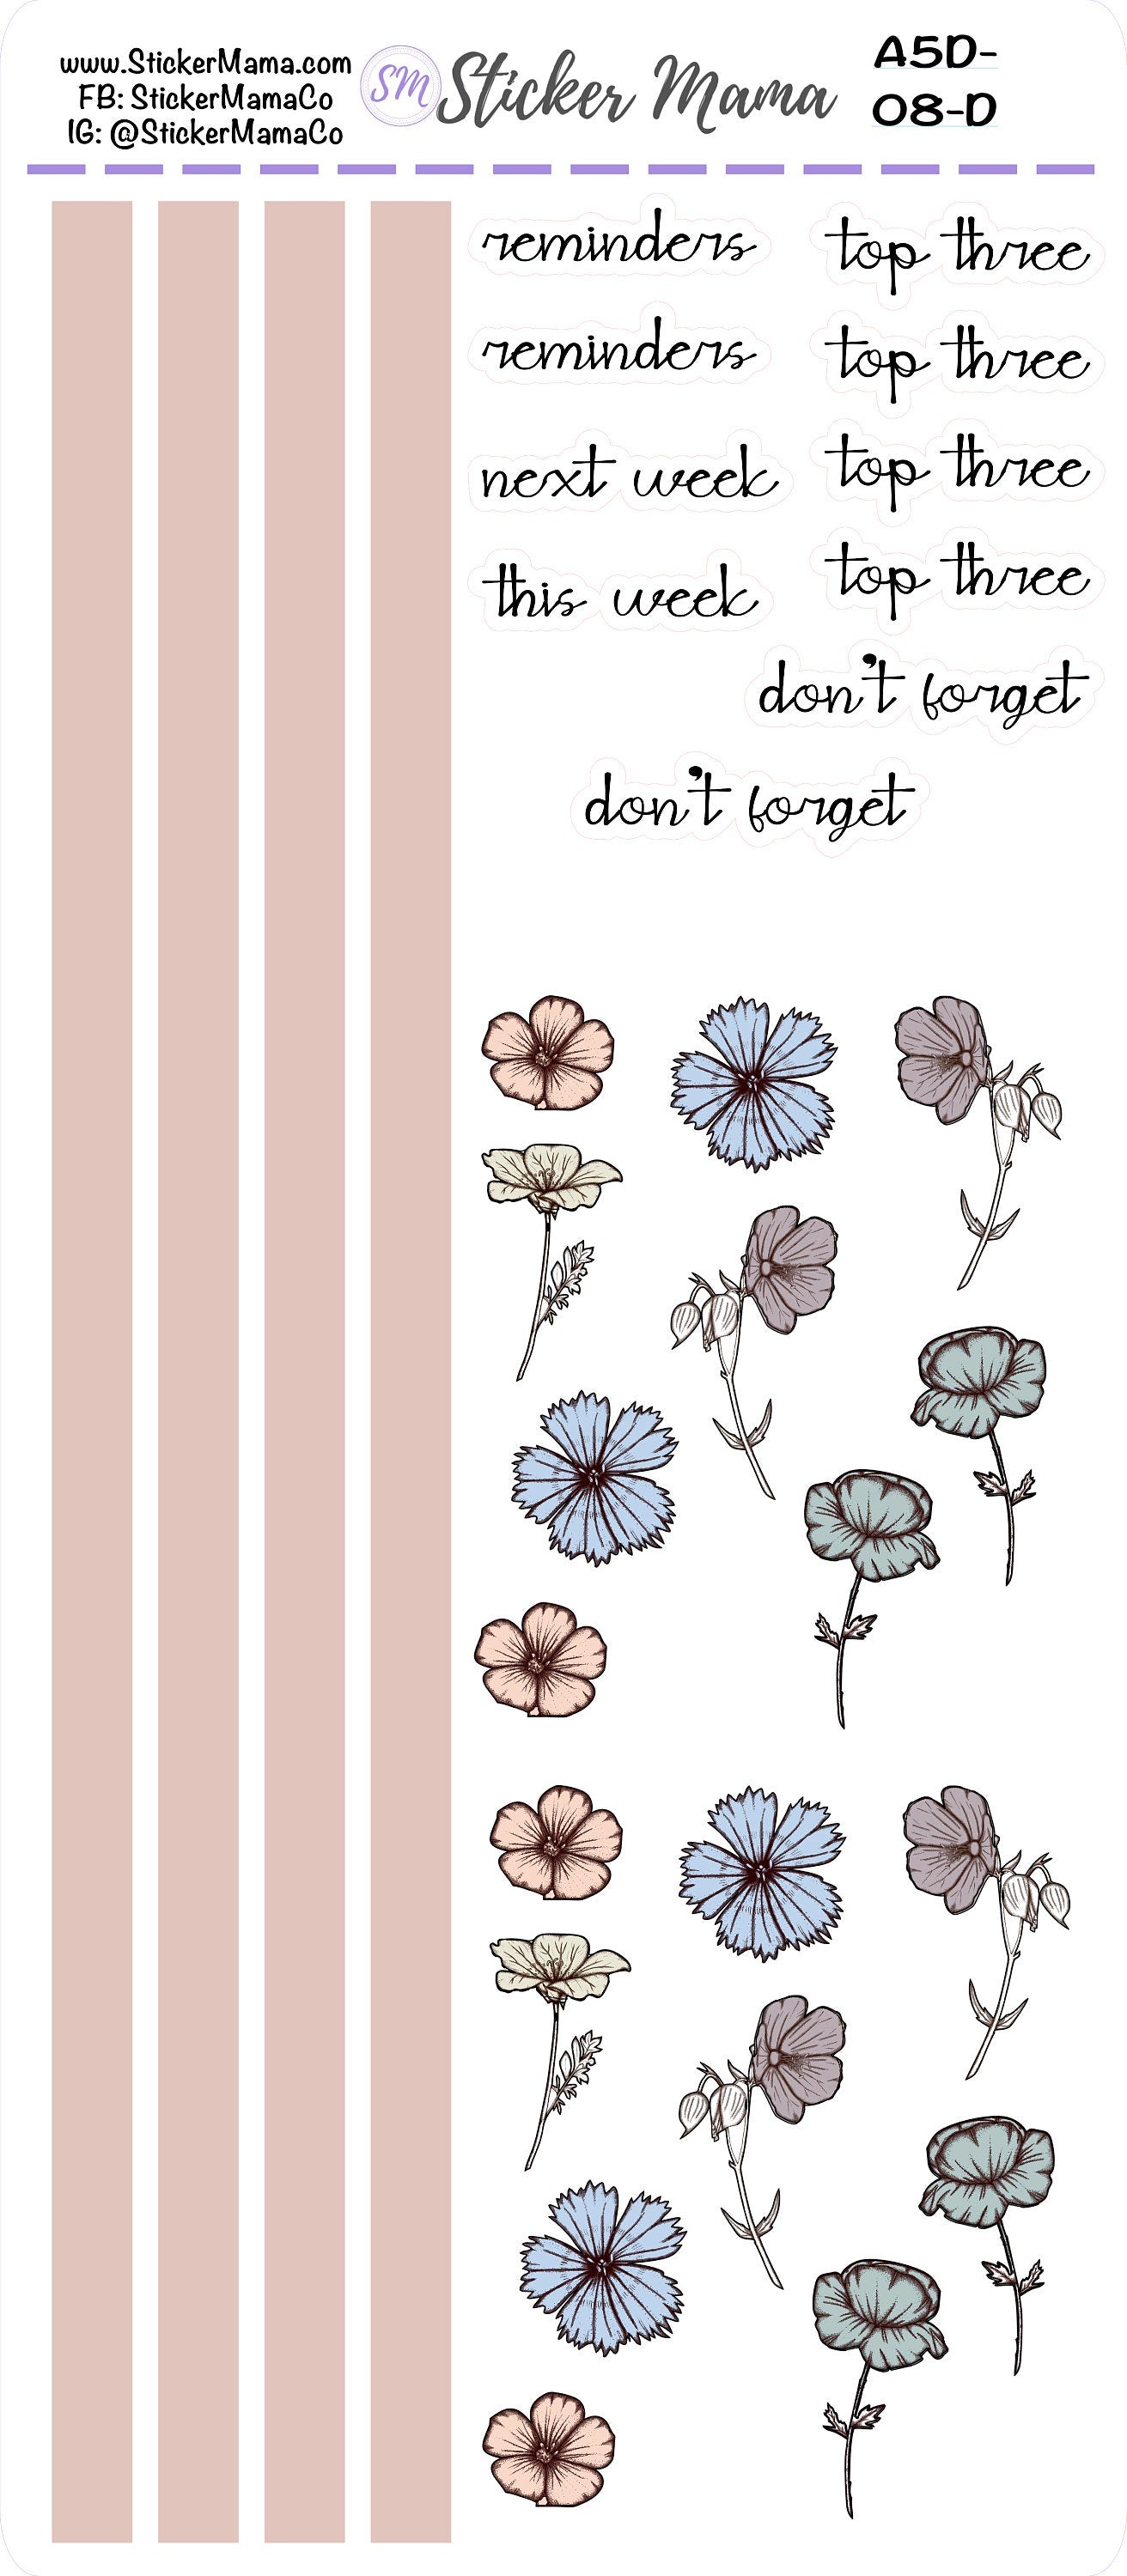 Daily A5/Daily Duo A5 -August - EC Flora Agenda - A5 - Daily Duo - A5 Planner Stickers - Agenda Stickers